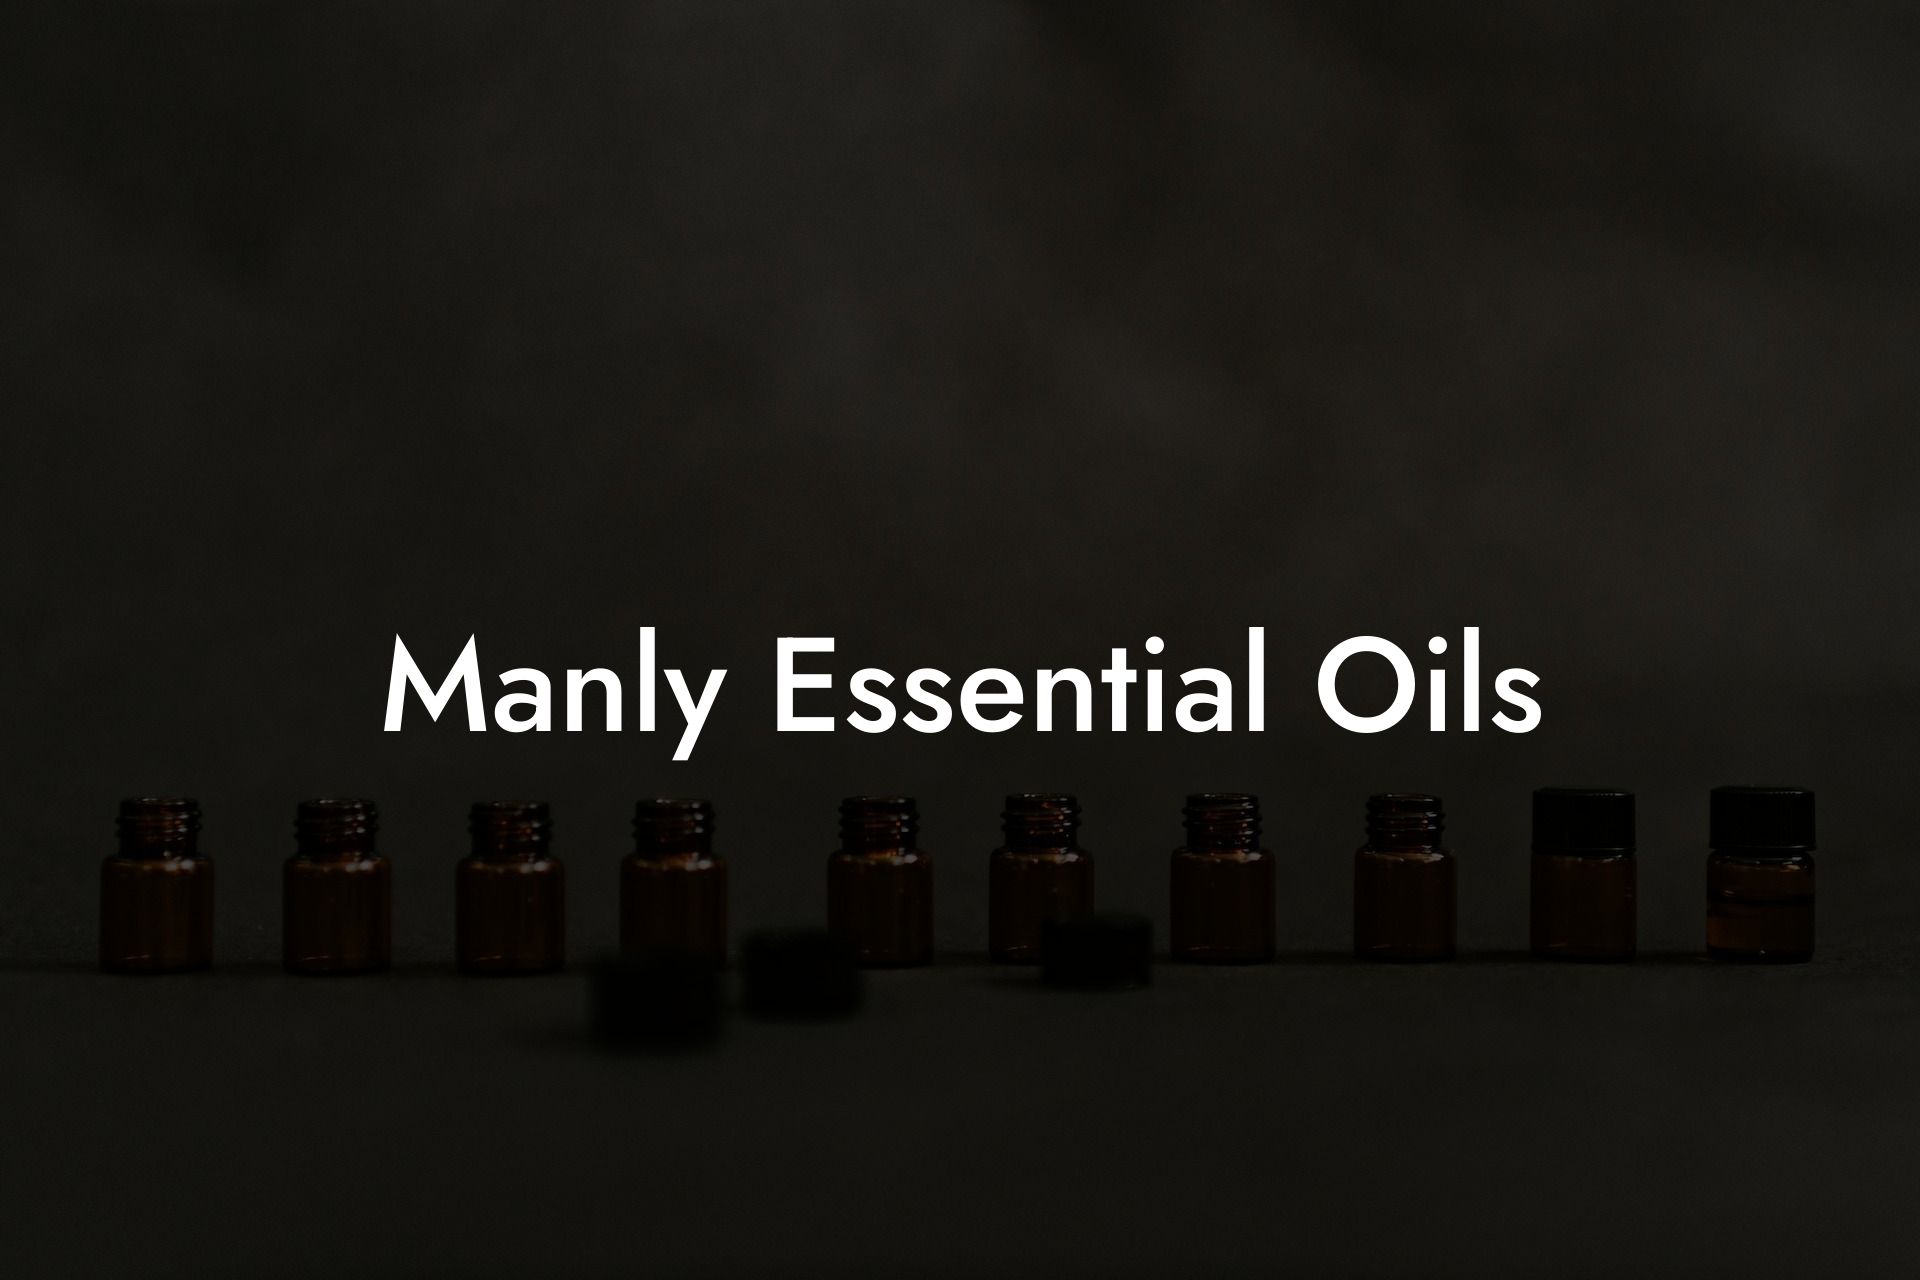 Manly Essential Oils